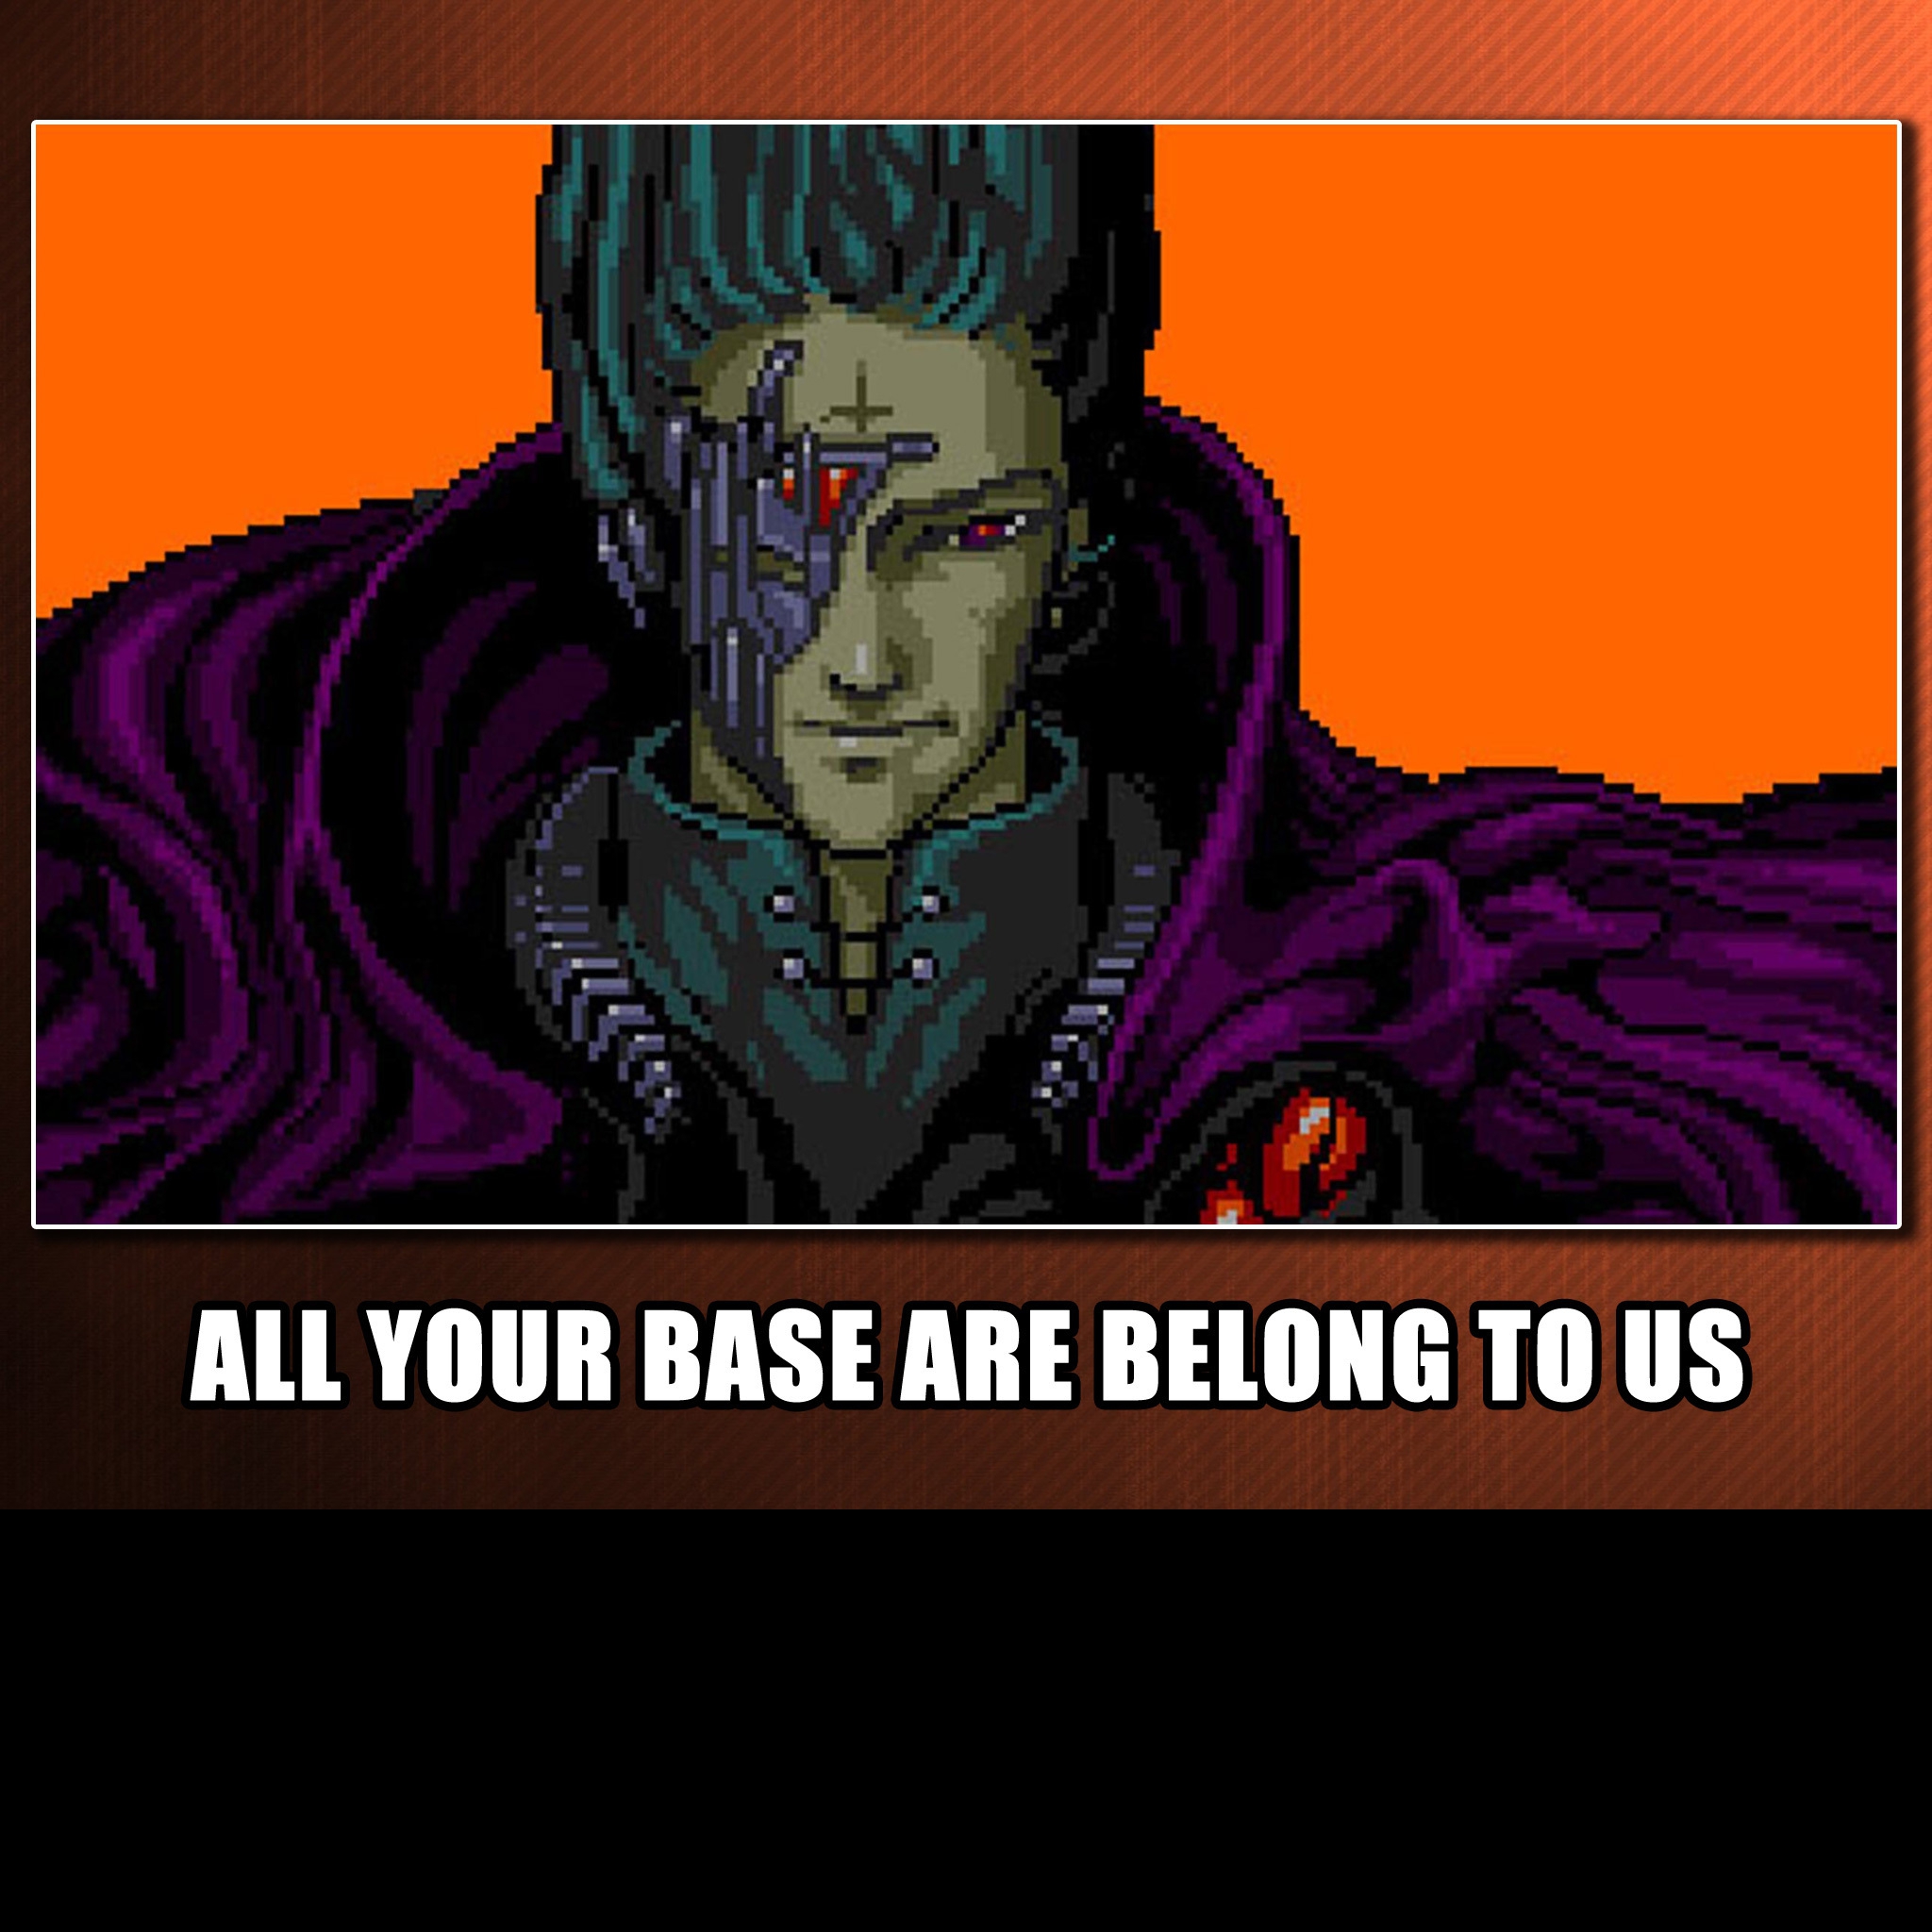 all-your-base-are-belong-to-us-9009-2560x1600.jpg